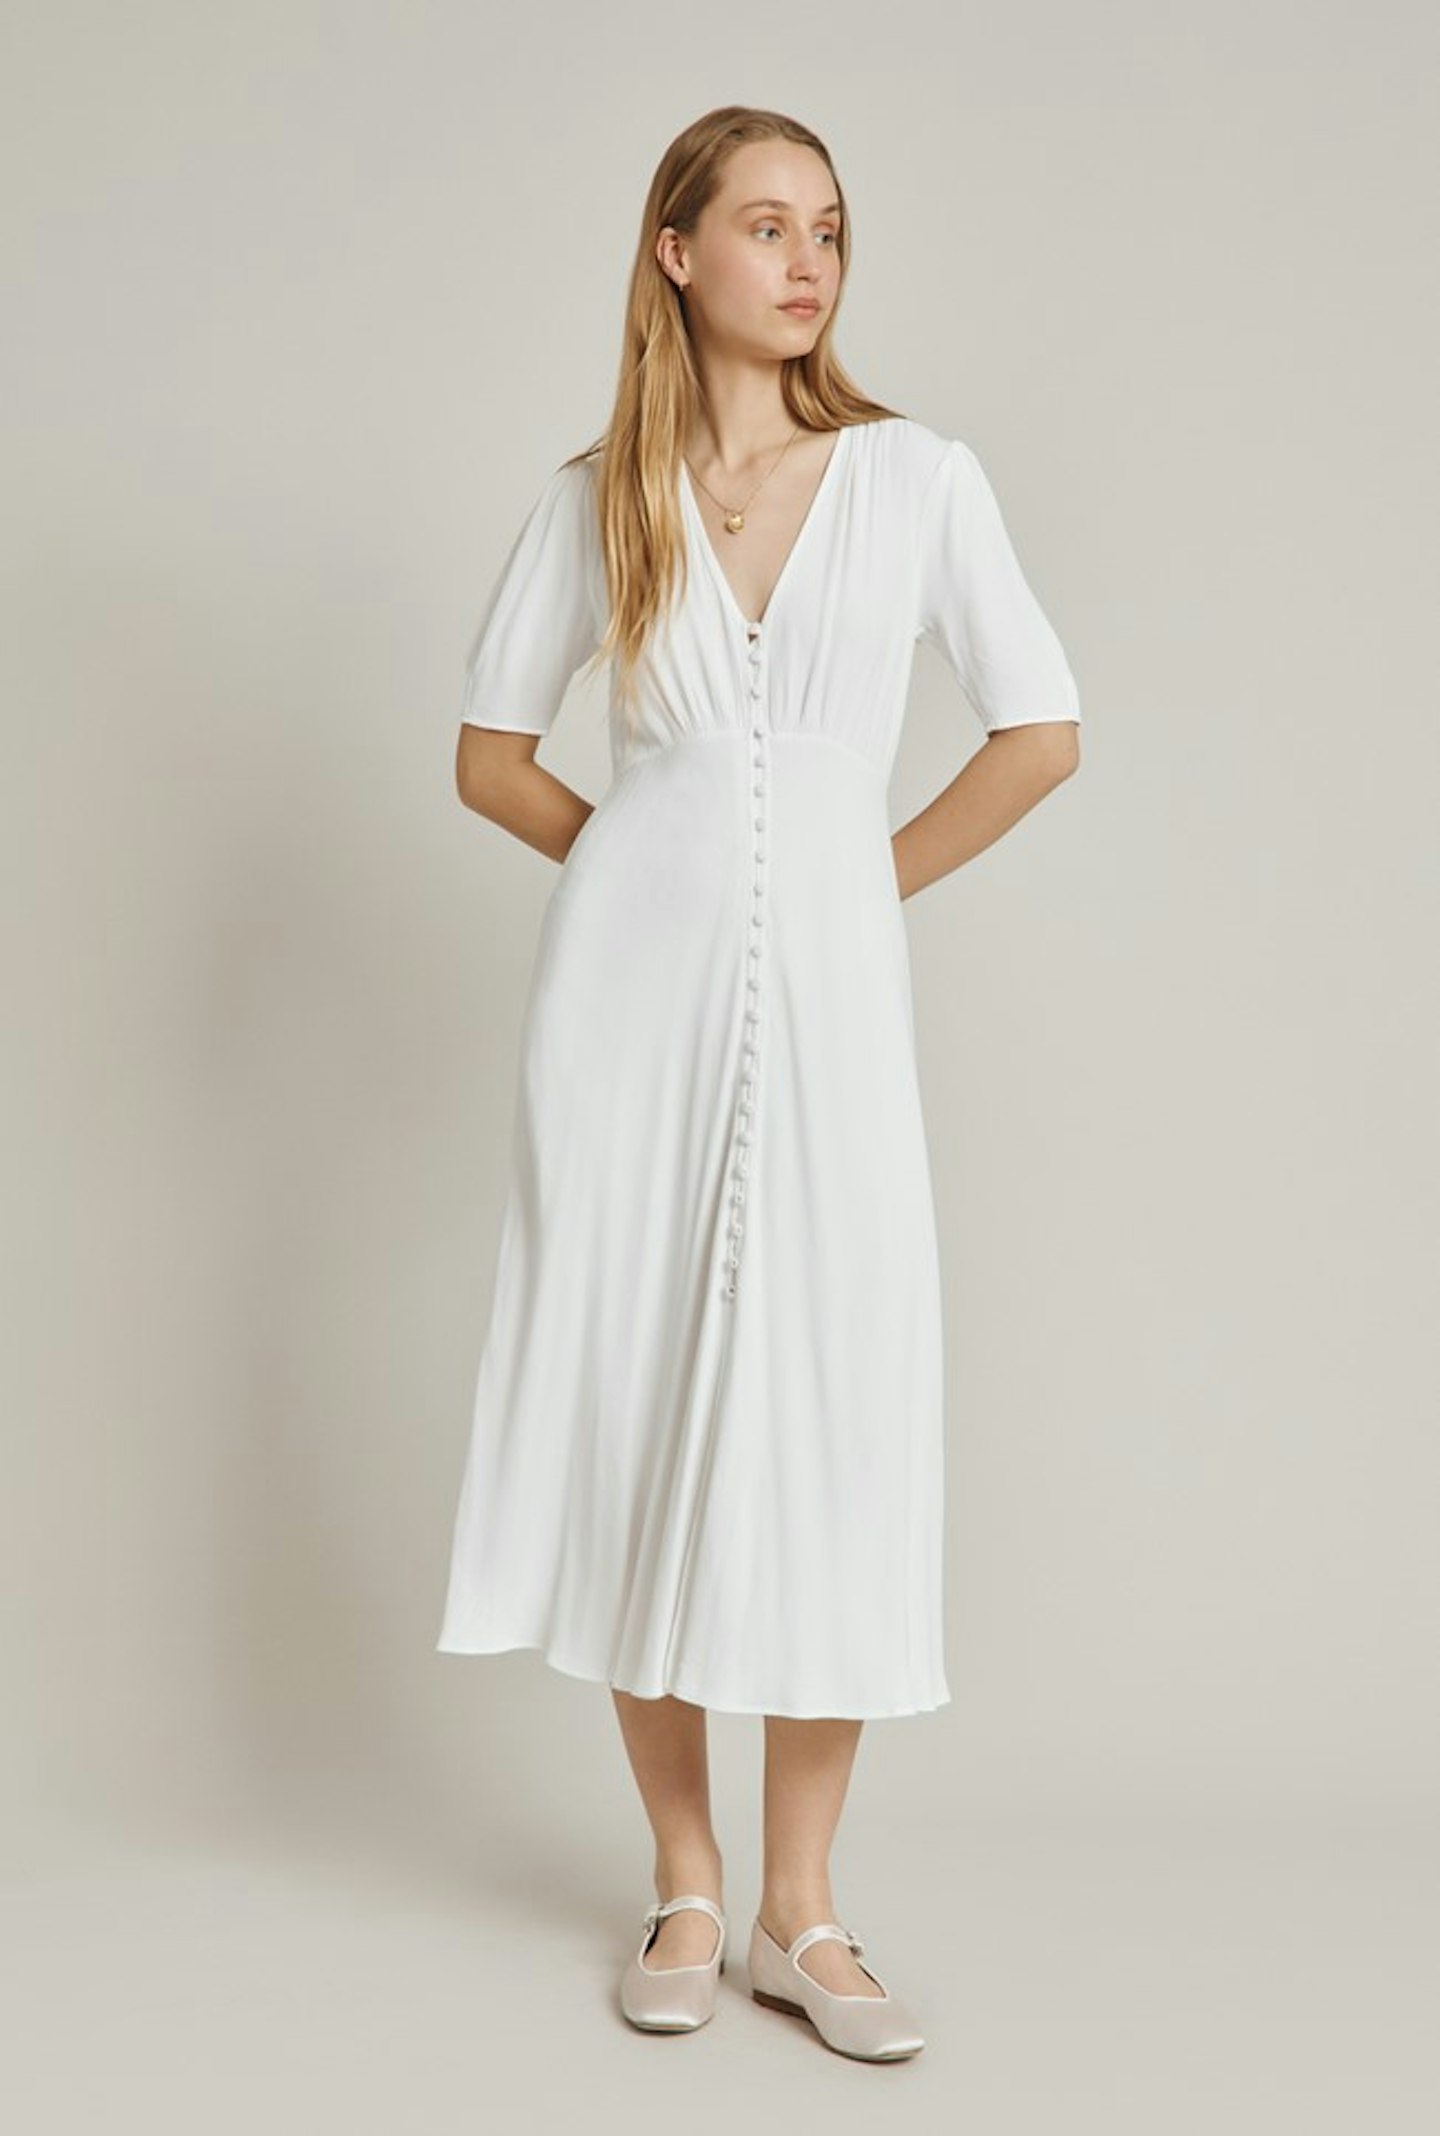 Ghost, Lucy Dress White, £129